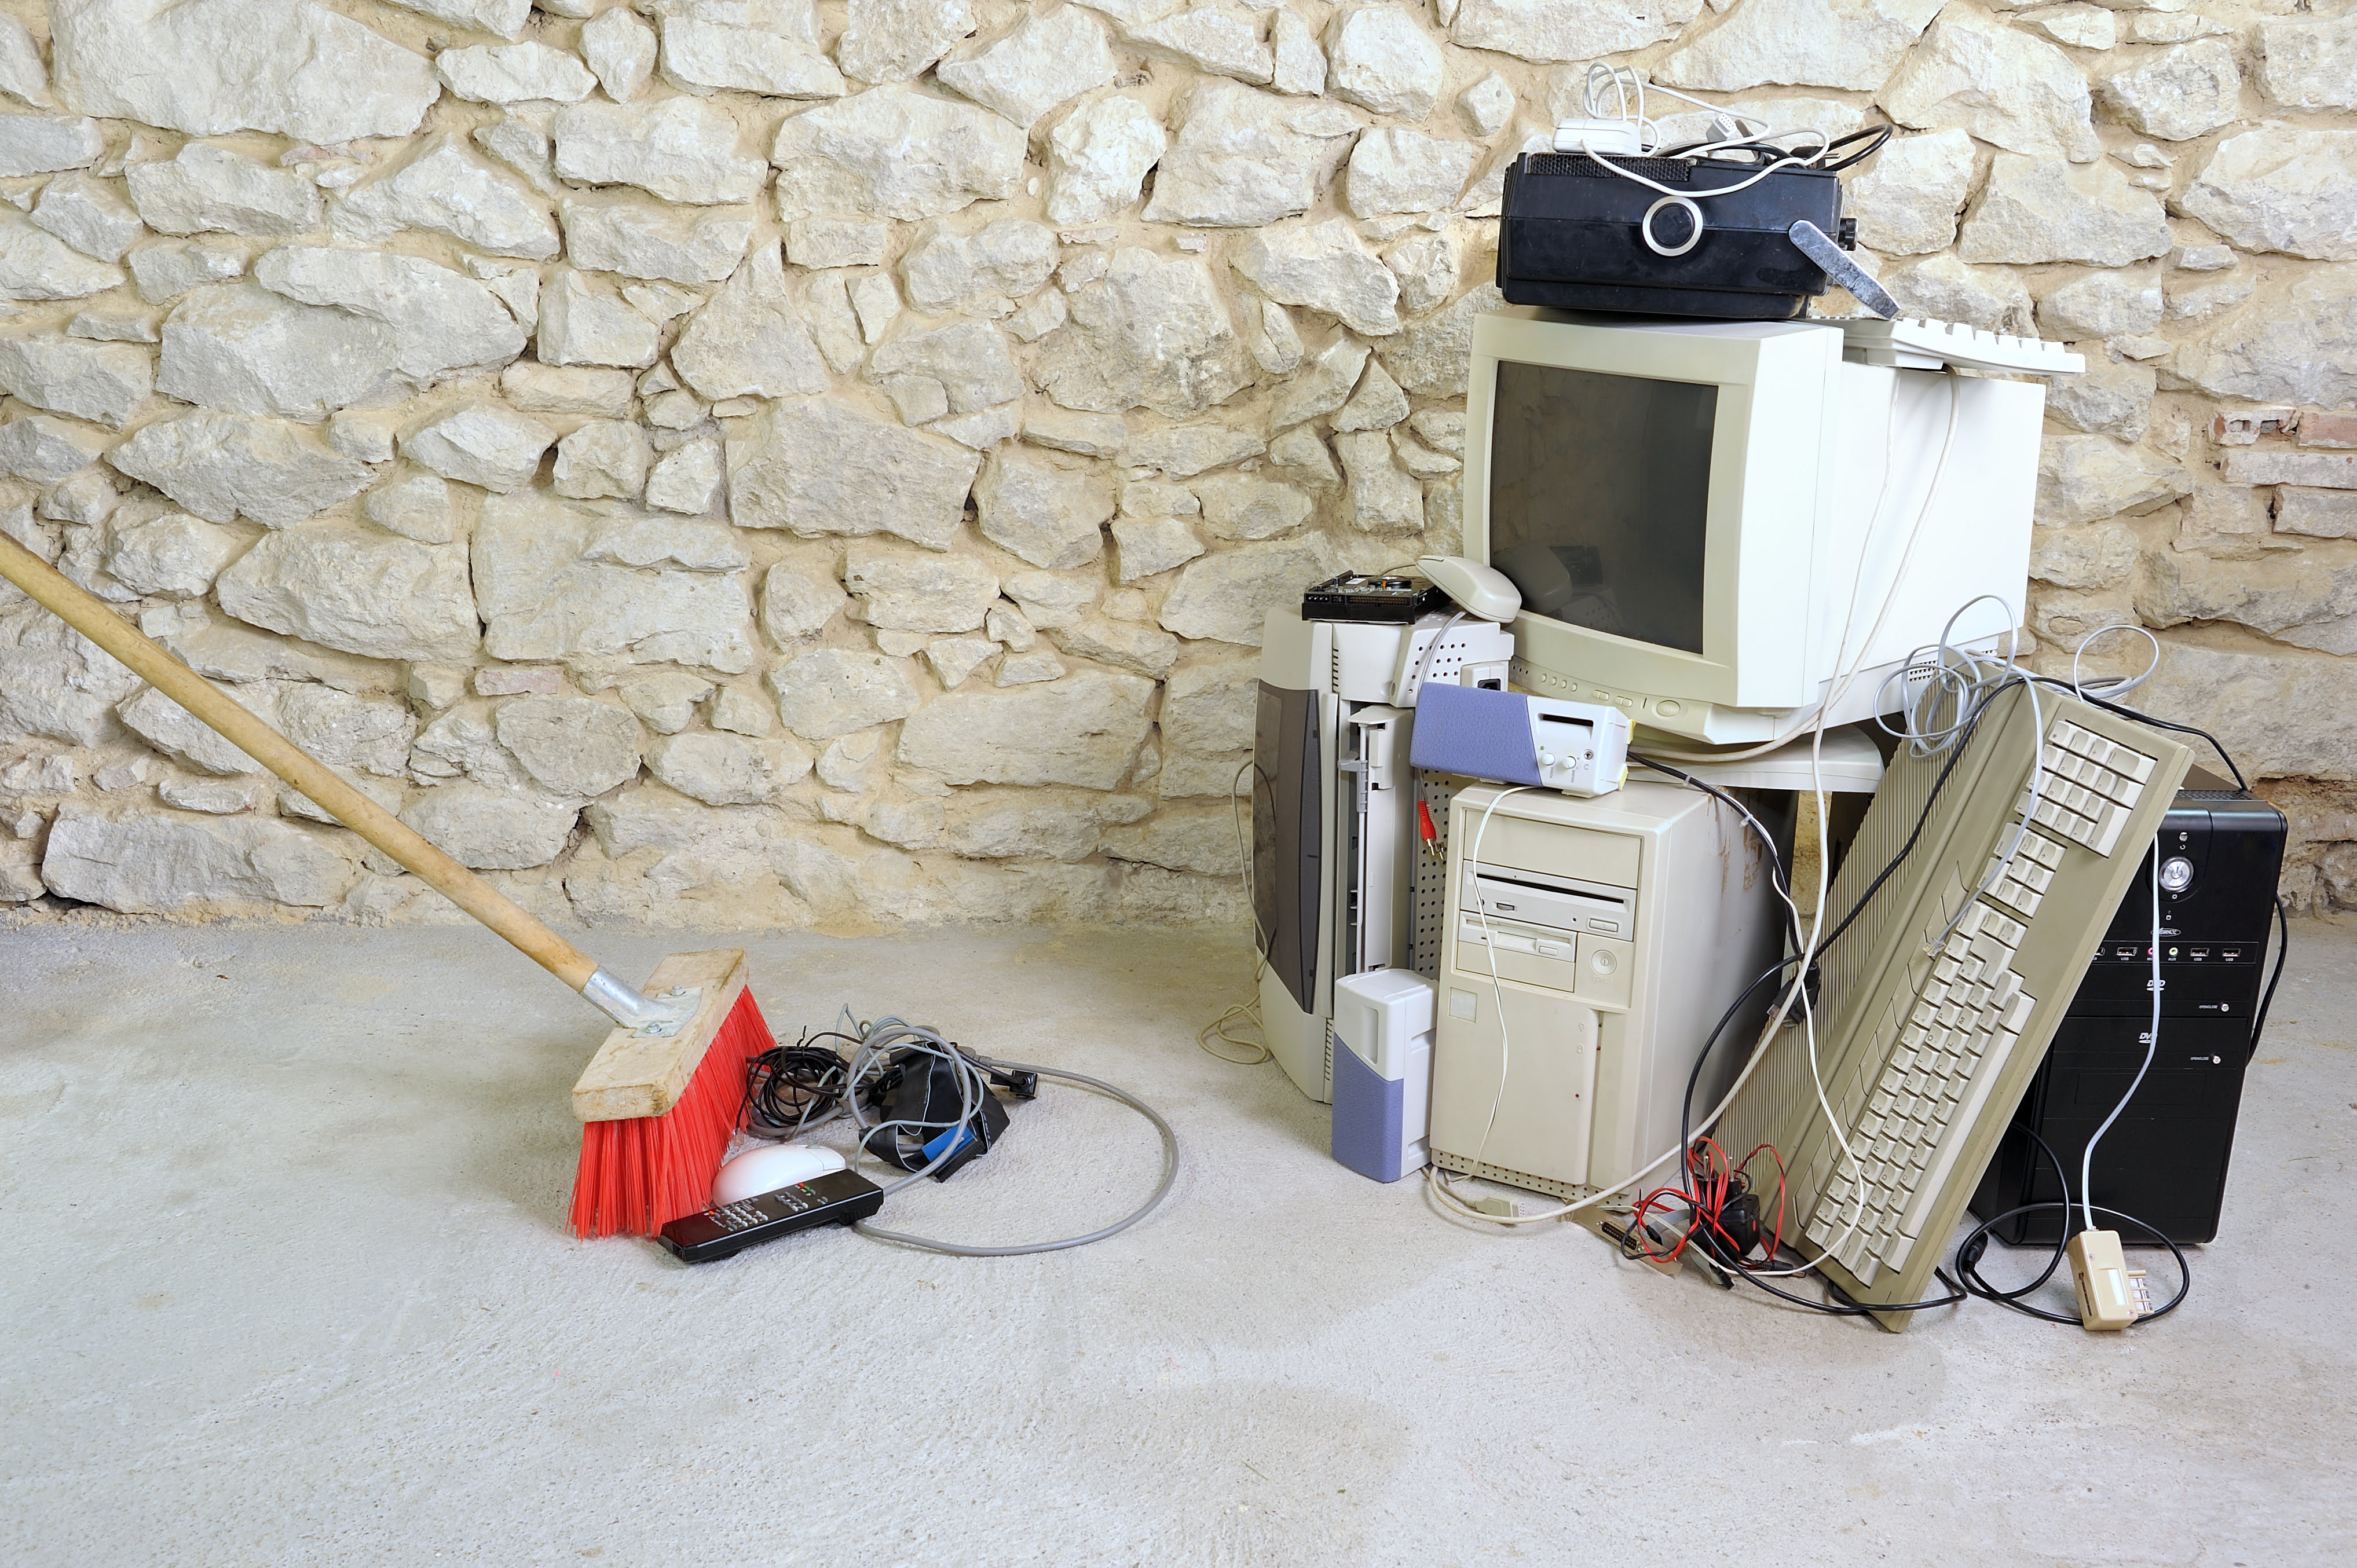 Examples of Waste Electrical and Electronic Equipment (WEEE)